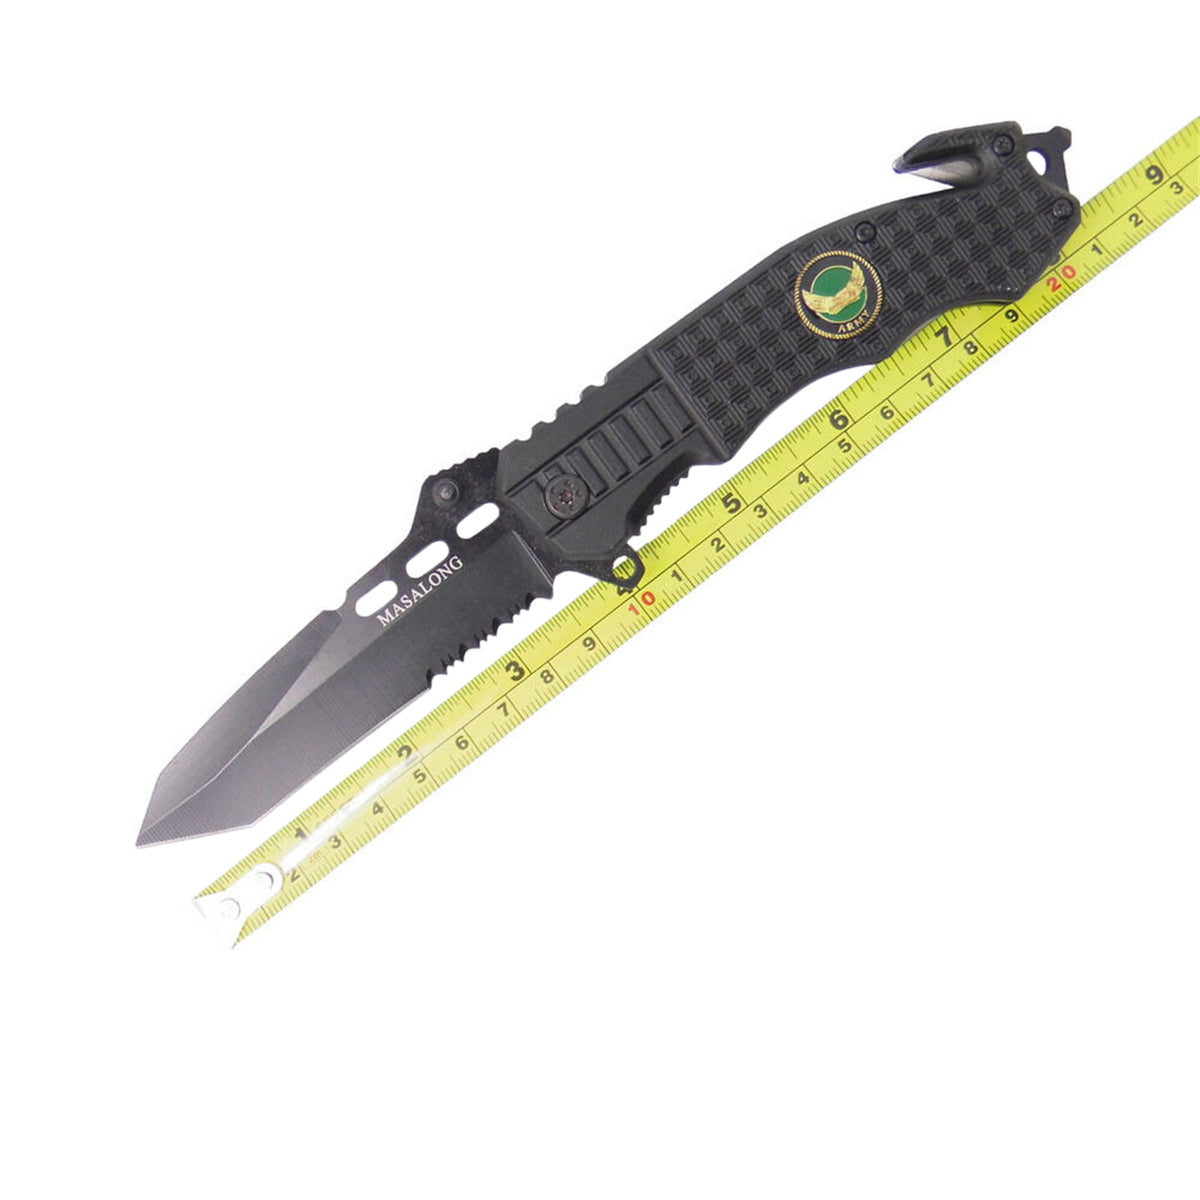 MASALONG Kni29 Hunting Survival Outdoor Folding Tactical Rescue Pocket Knife Saw Glass Chisel